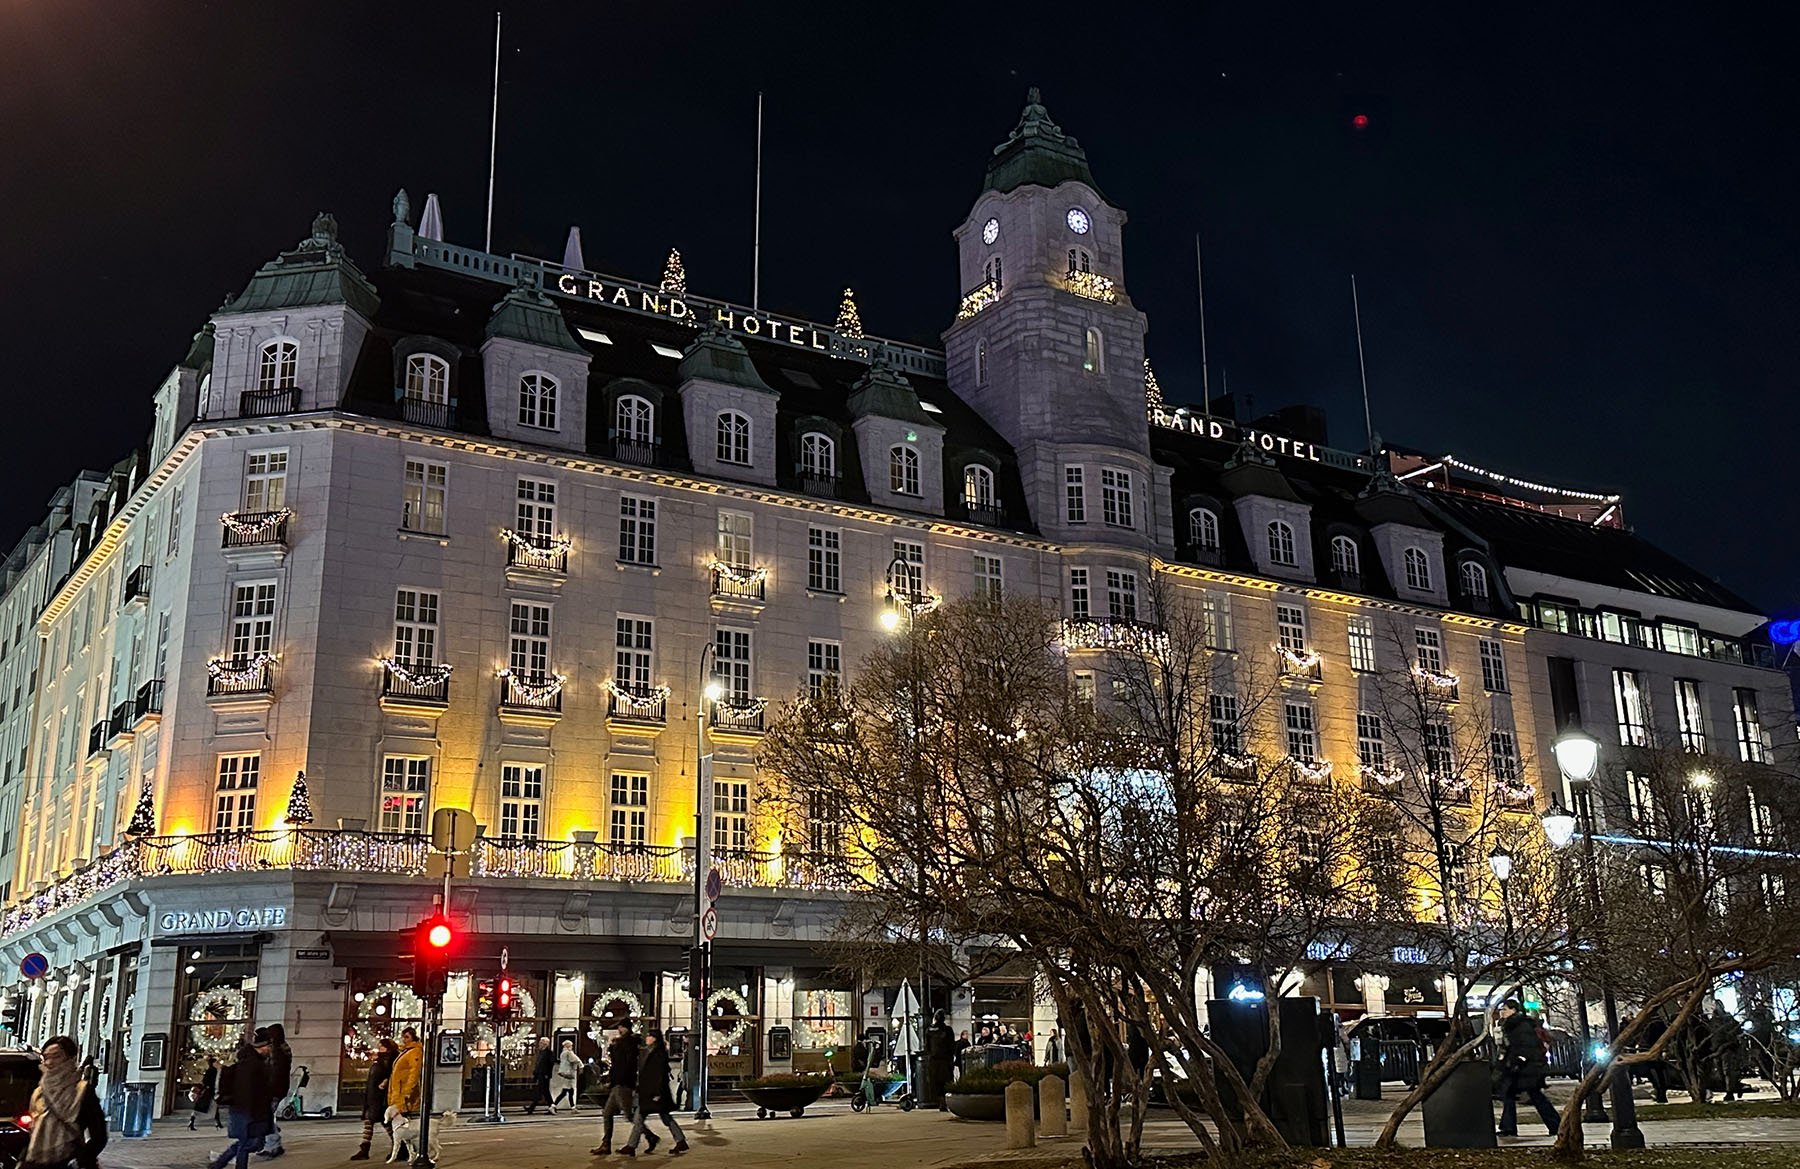 Exterior of Grand Hotel in Oslo, Norway.